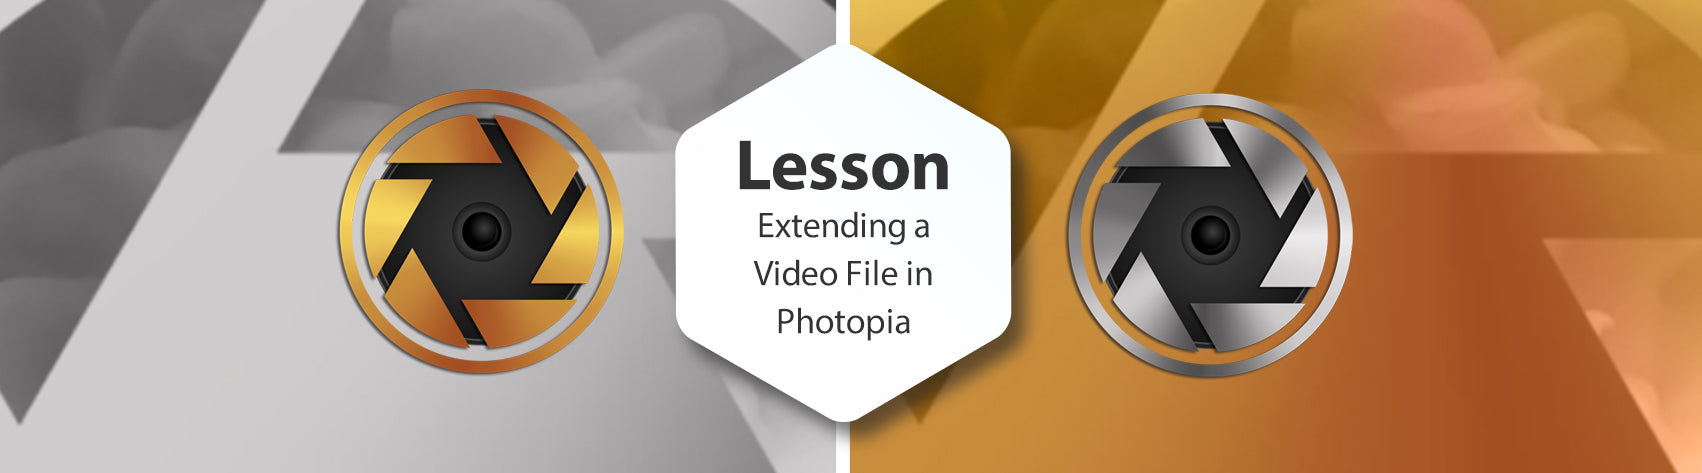 Lesson - Extending Video Files in Photopia